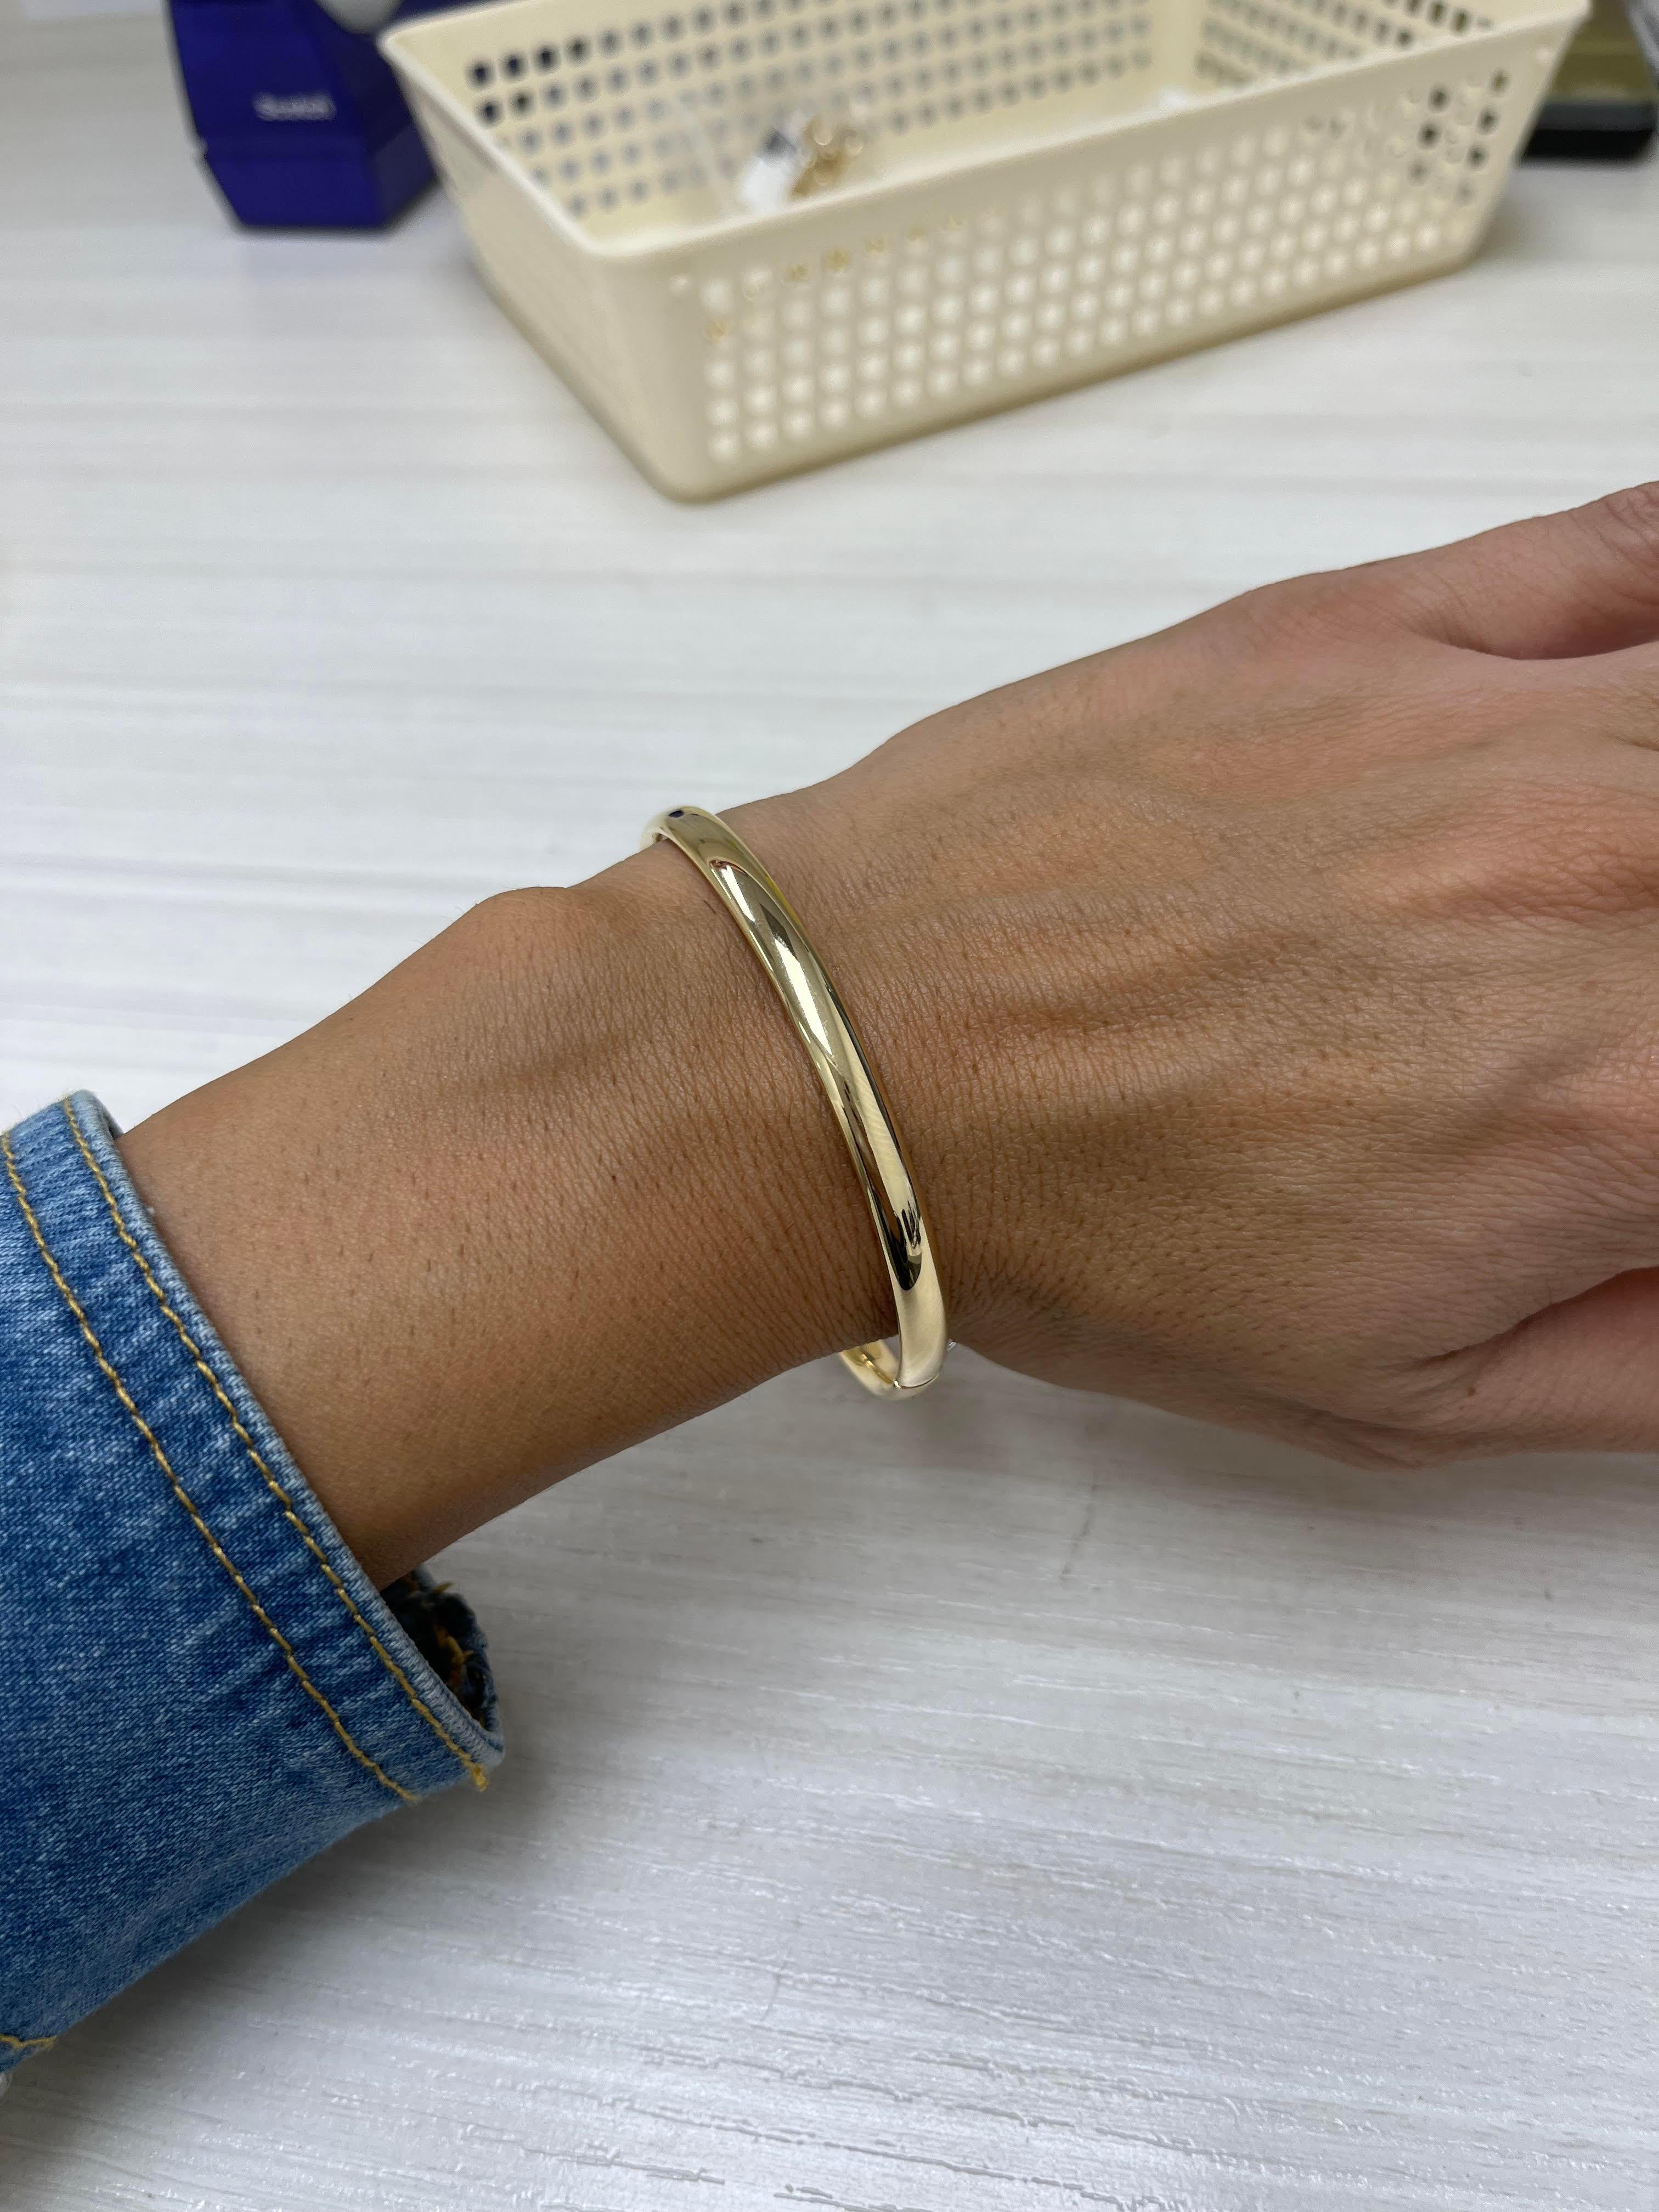 14K Gold Stackable Bangle in 5MM. Dimension is 7 inches.

This piece is perfect for everyday wear and makes the perfect Gift! 

We certify that this is an authentic piece of Fine jewelry. Every piece is crafted with the utmost care and precision.